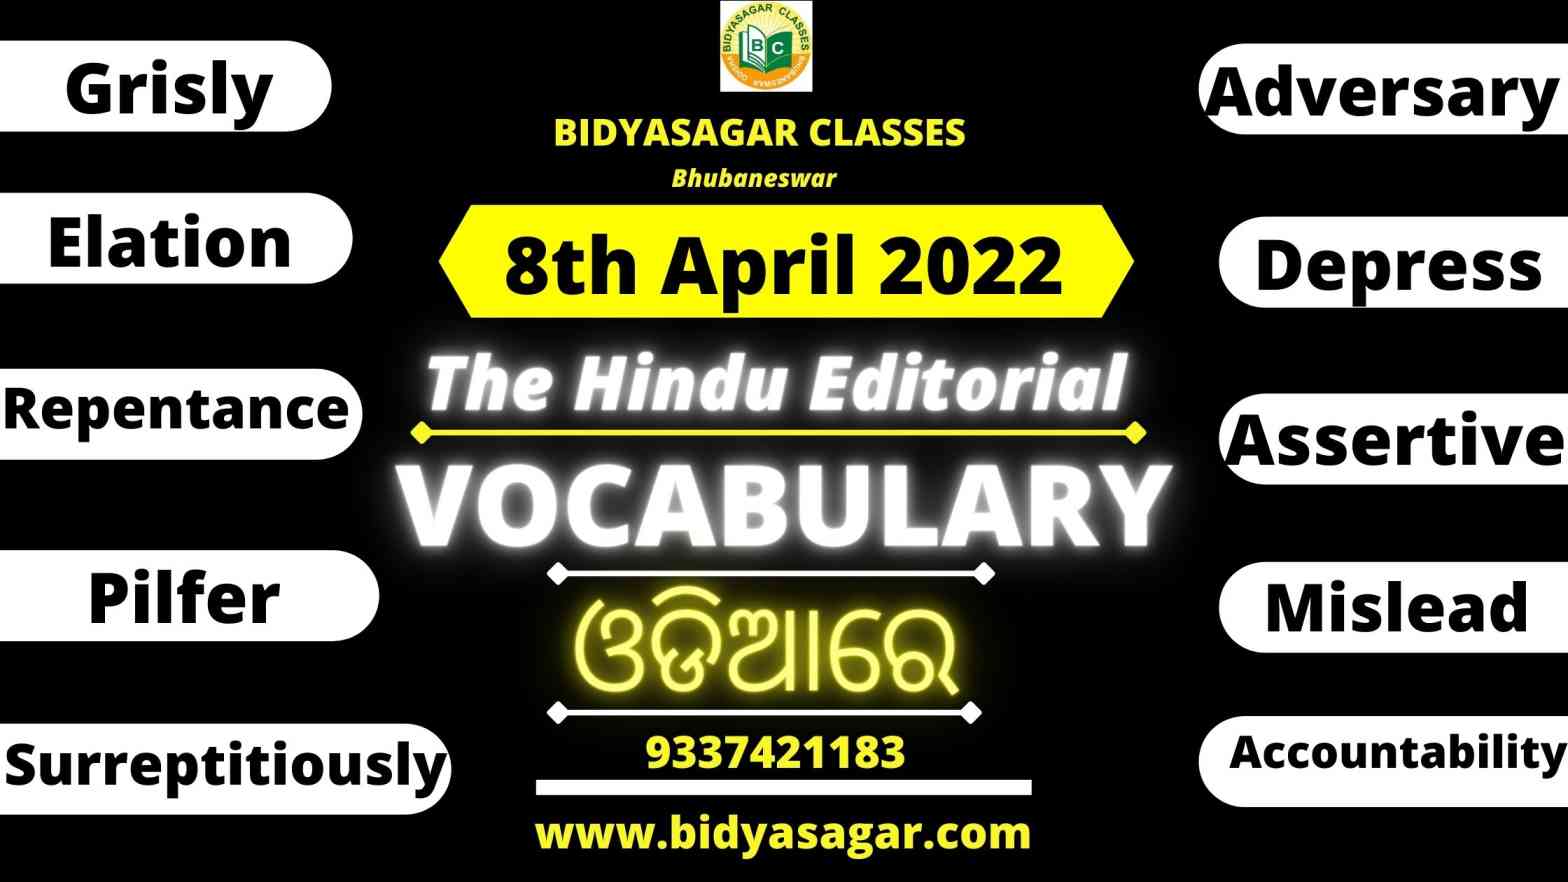 The Hindu Editorial Vocabulary of 8th April 2022